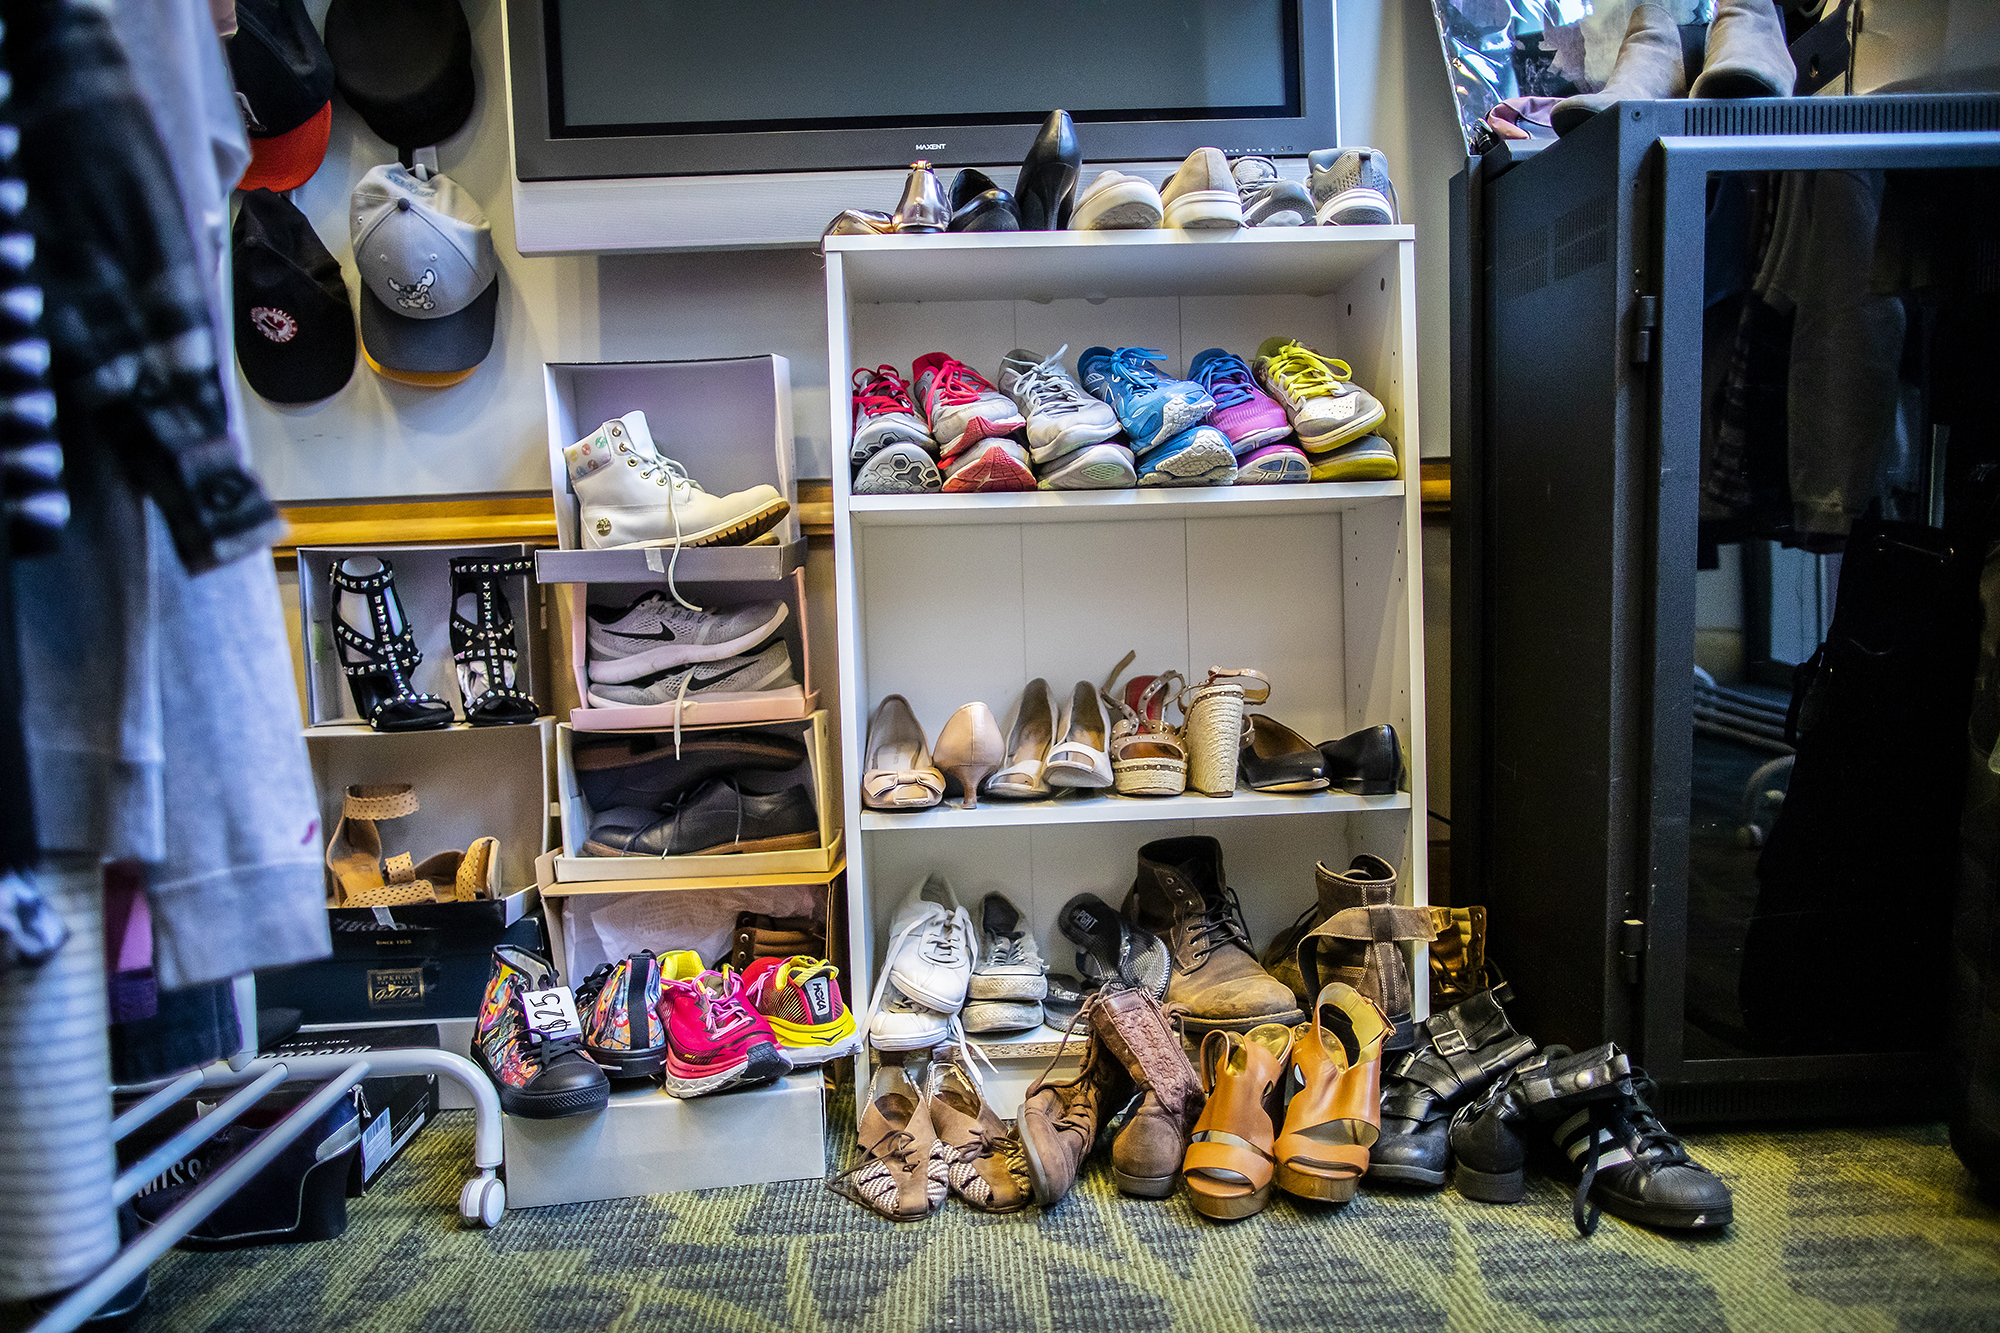 Many pairs of shoes in different styles, on three shelves and spilling onto the floor. A television is above them, and several hanging hats sit to the left. Clothes in the foreground are blurry.